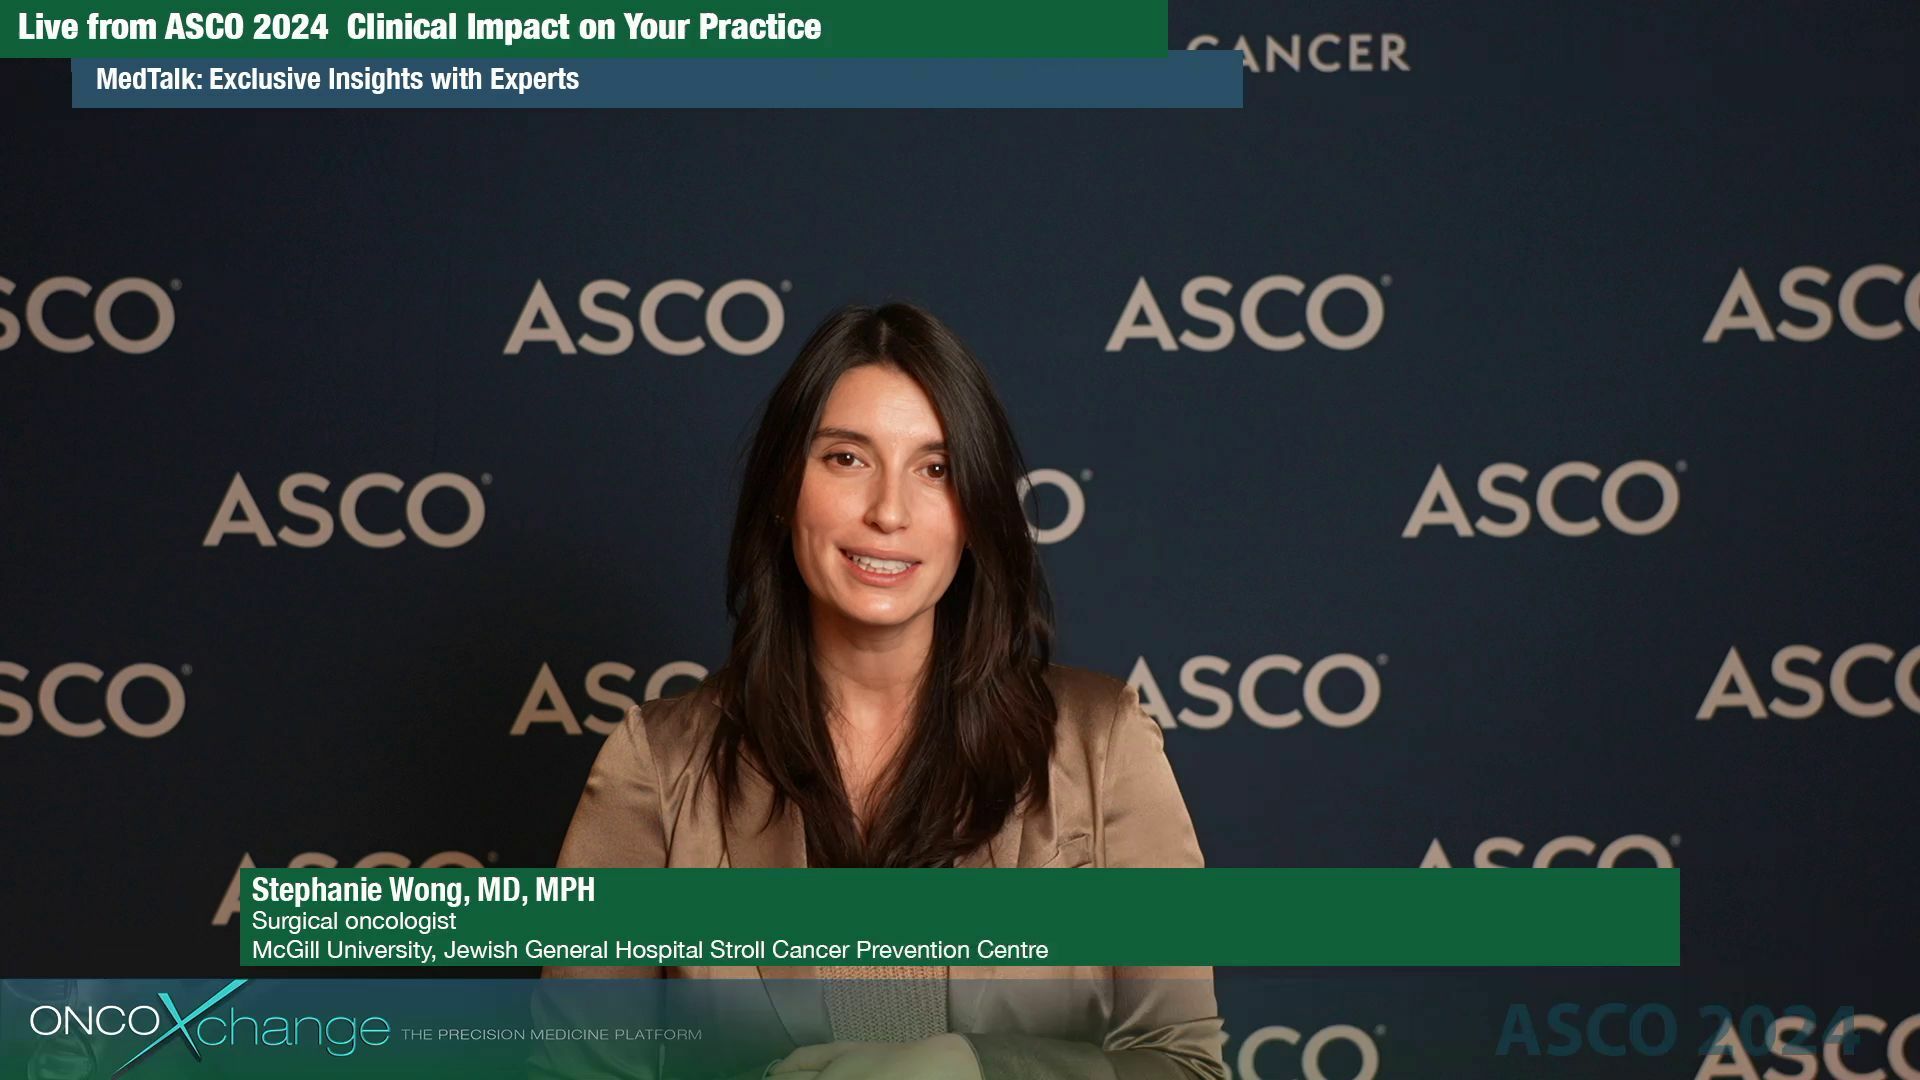 ASCO 2024 - MedTalk: Dr. Stephanie Wong on PARPi Eligibility in Women with Newly Diagnosed Invasive Breast Cancer